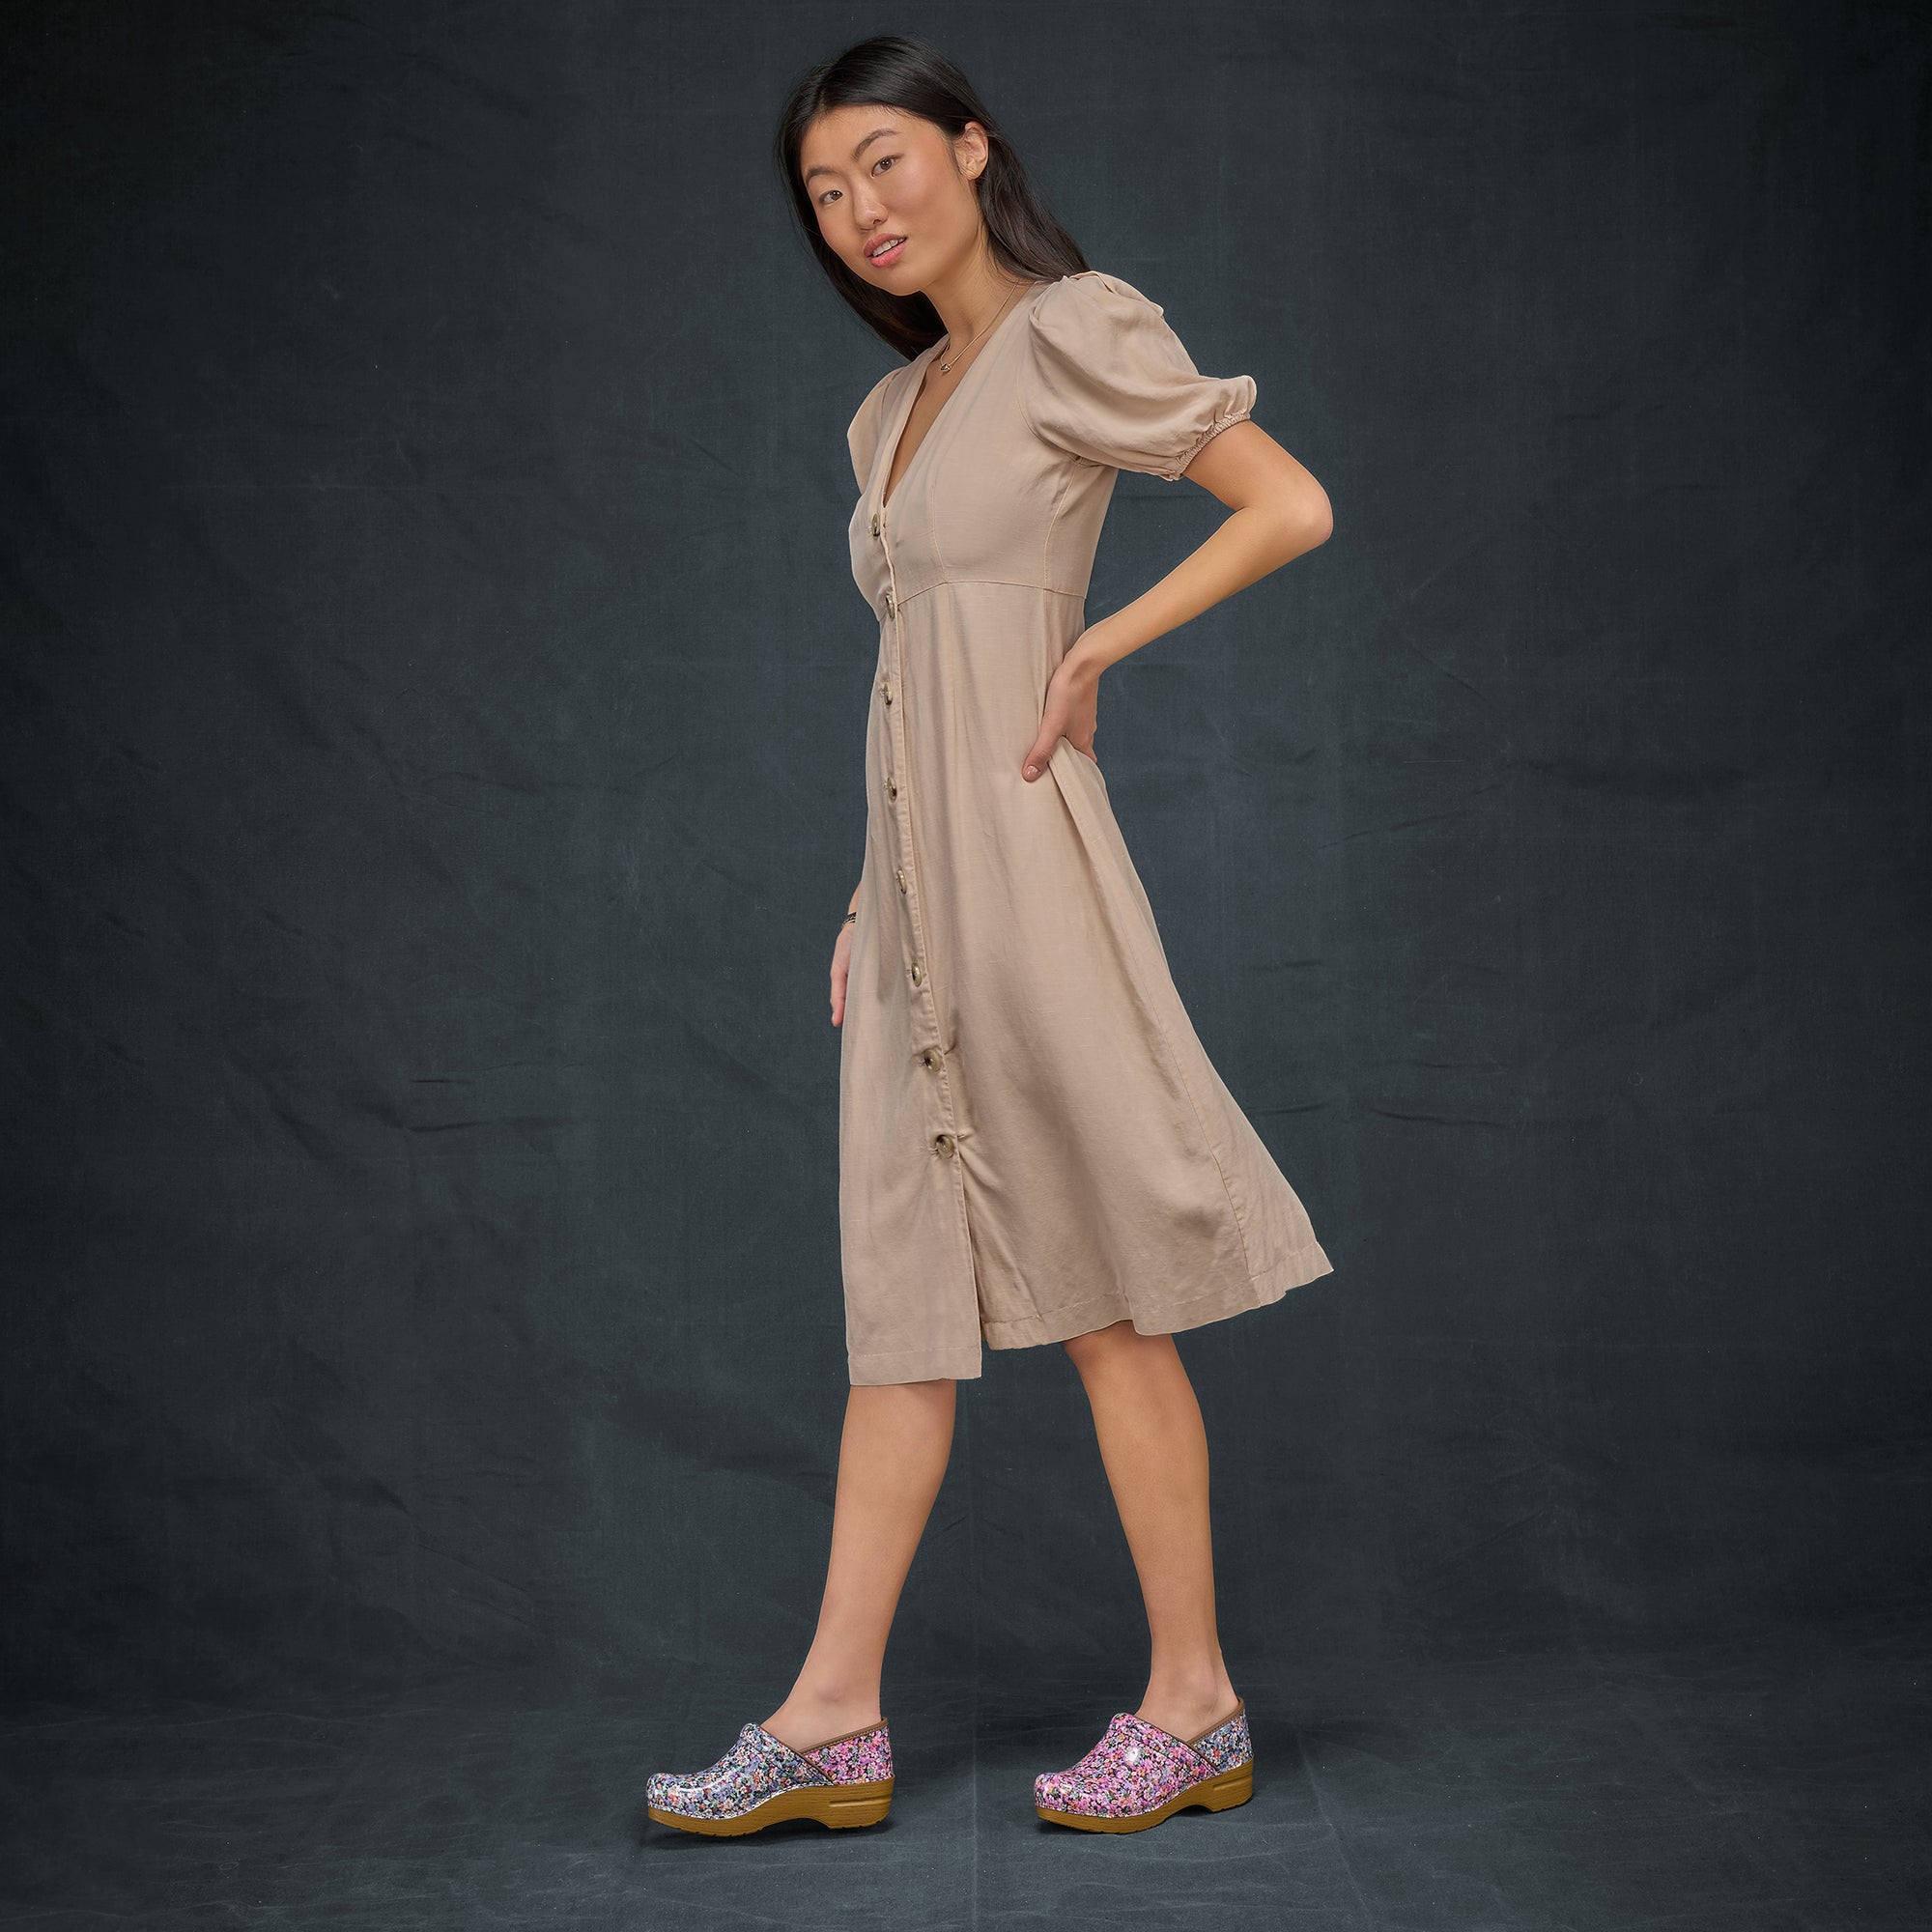 A woman wearing a tan dress and floral mismatched clogs in front of a black background.